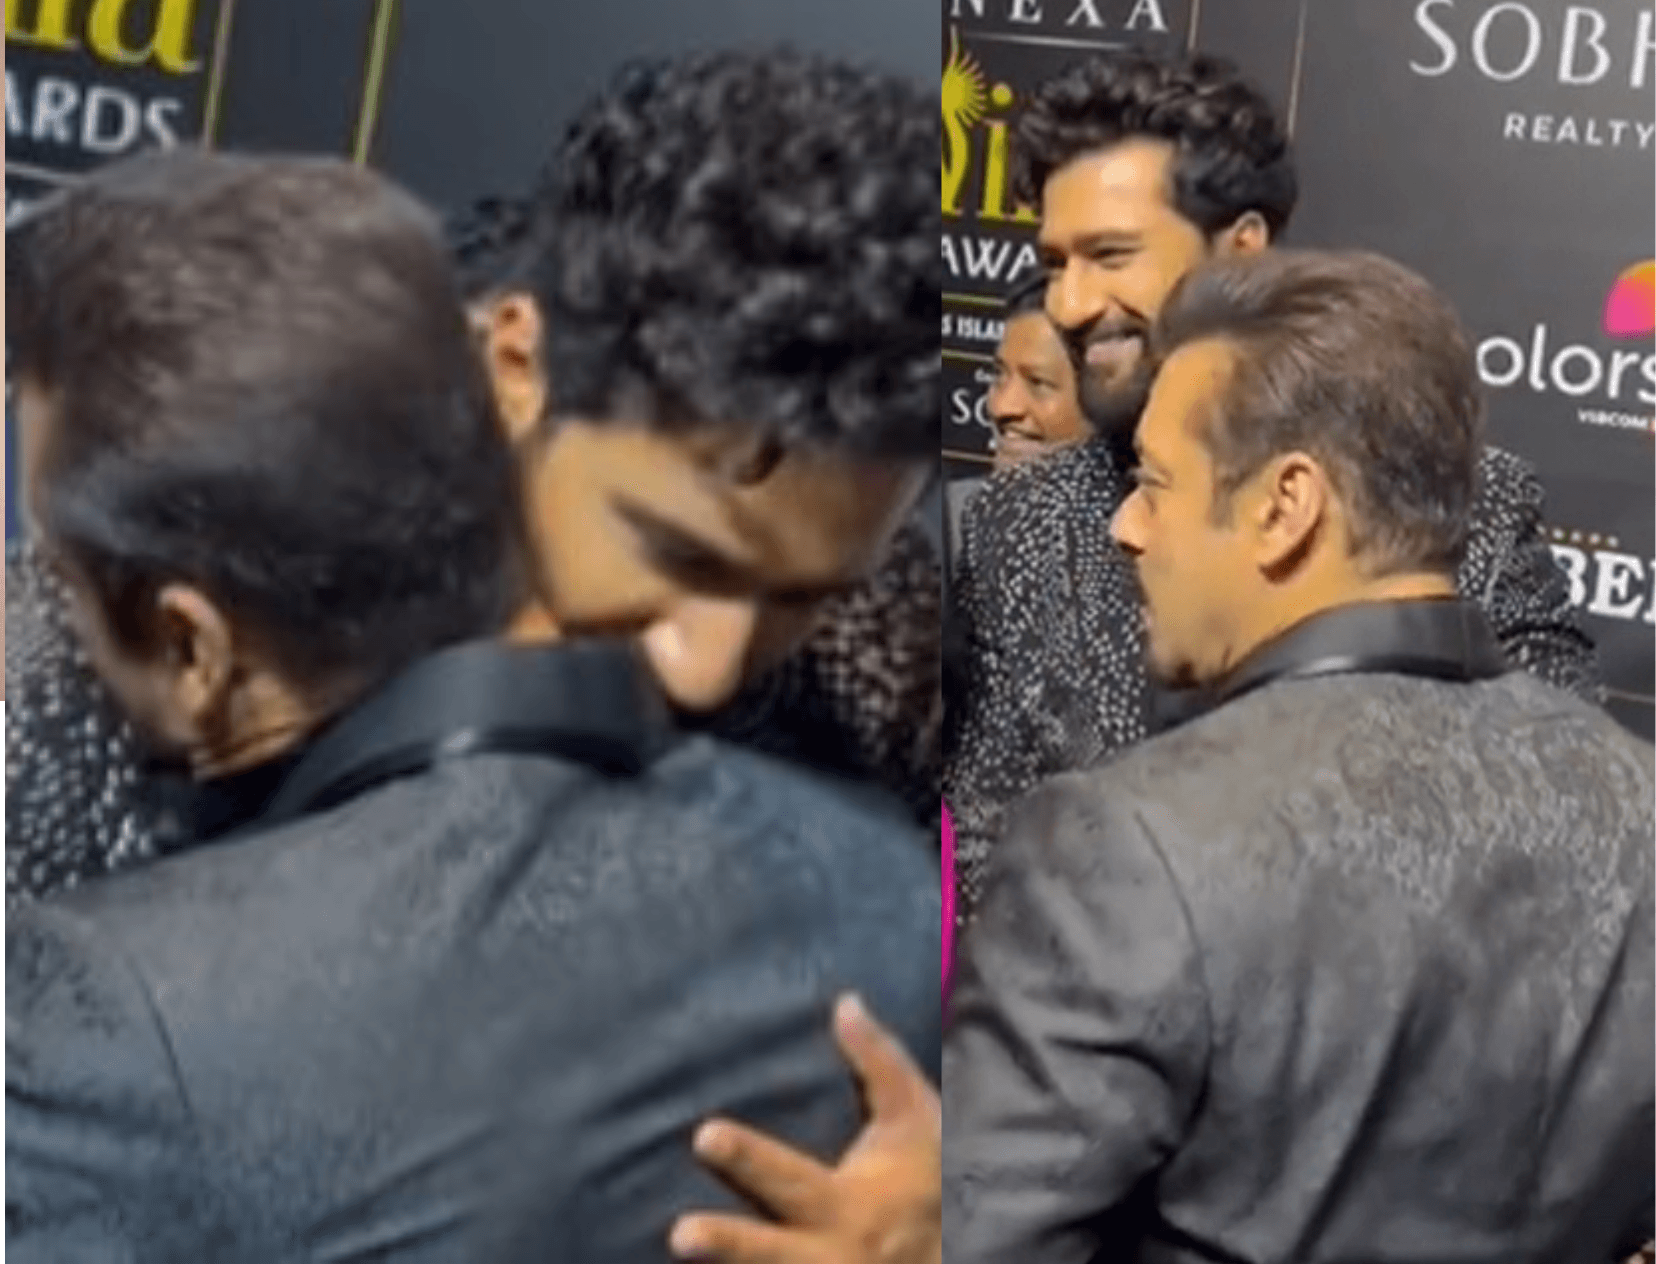 Salman Khan Is Upset ‘Coz Of IIFA Video With Vicky Kaushal, Here’s Why